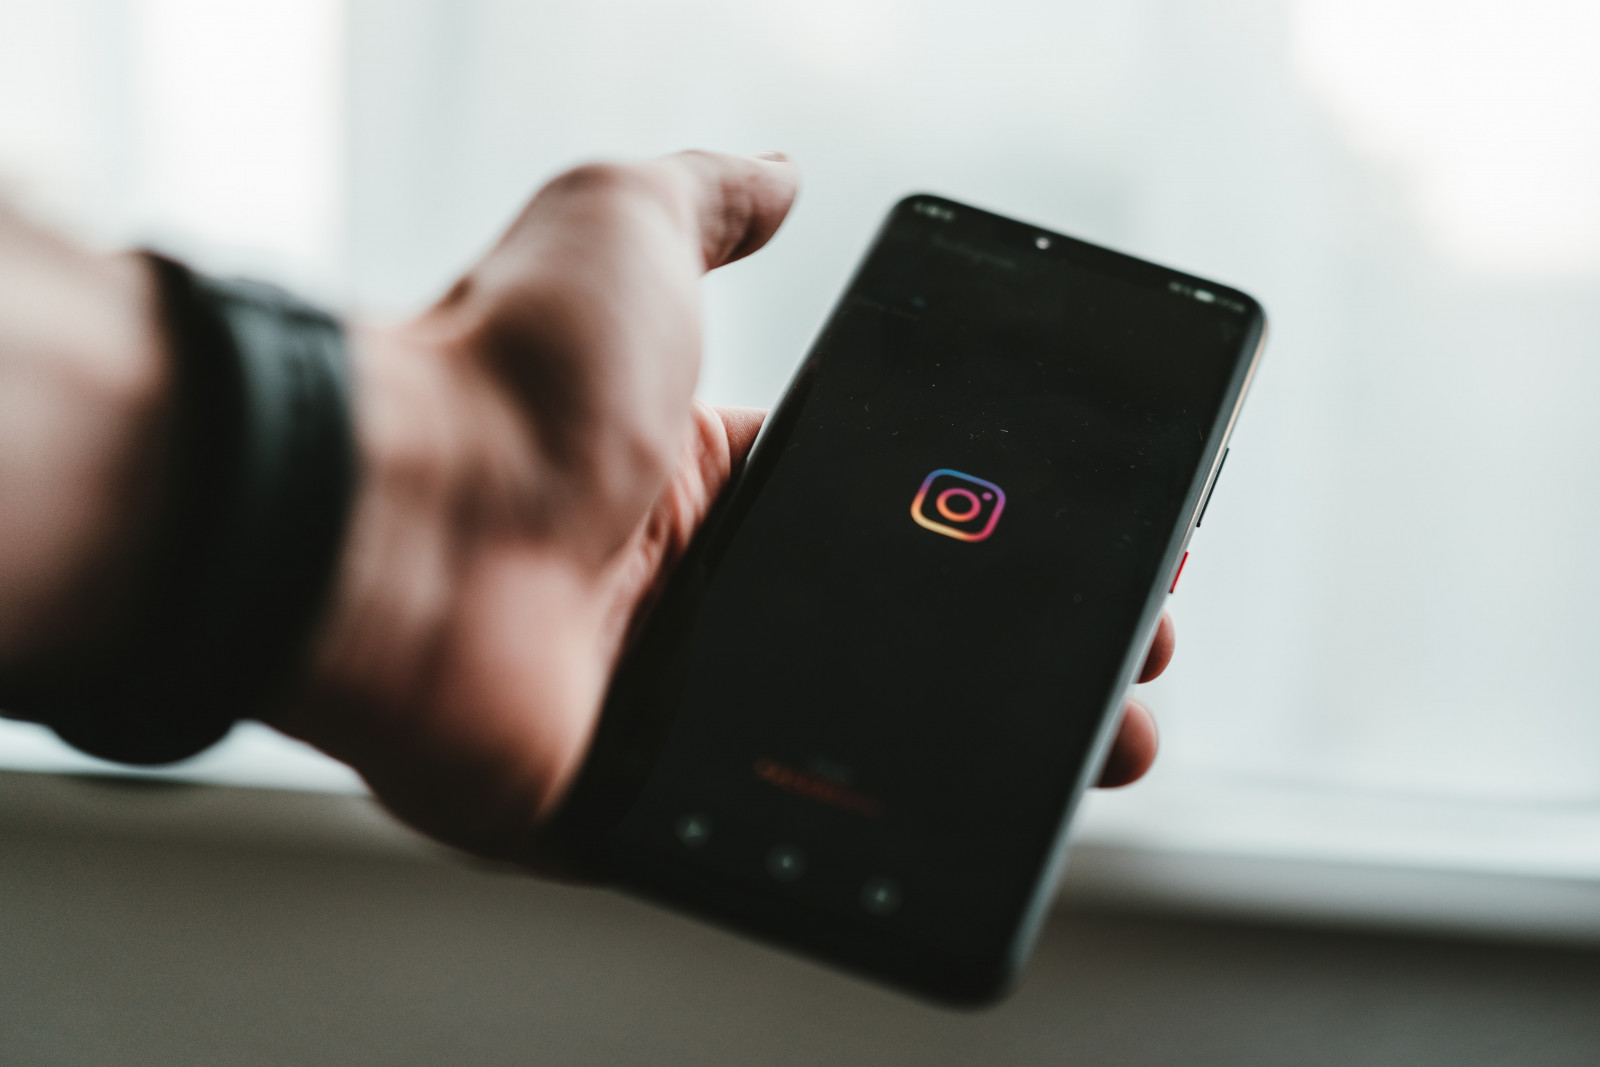 Cover image for Instagram continues to perform strongly despite inconsistent brand identity